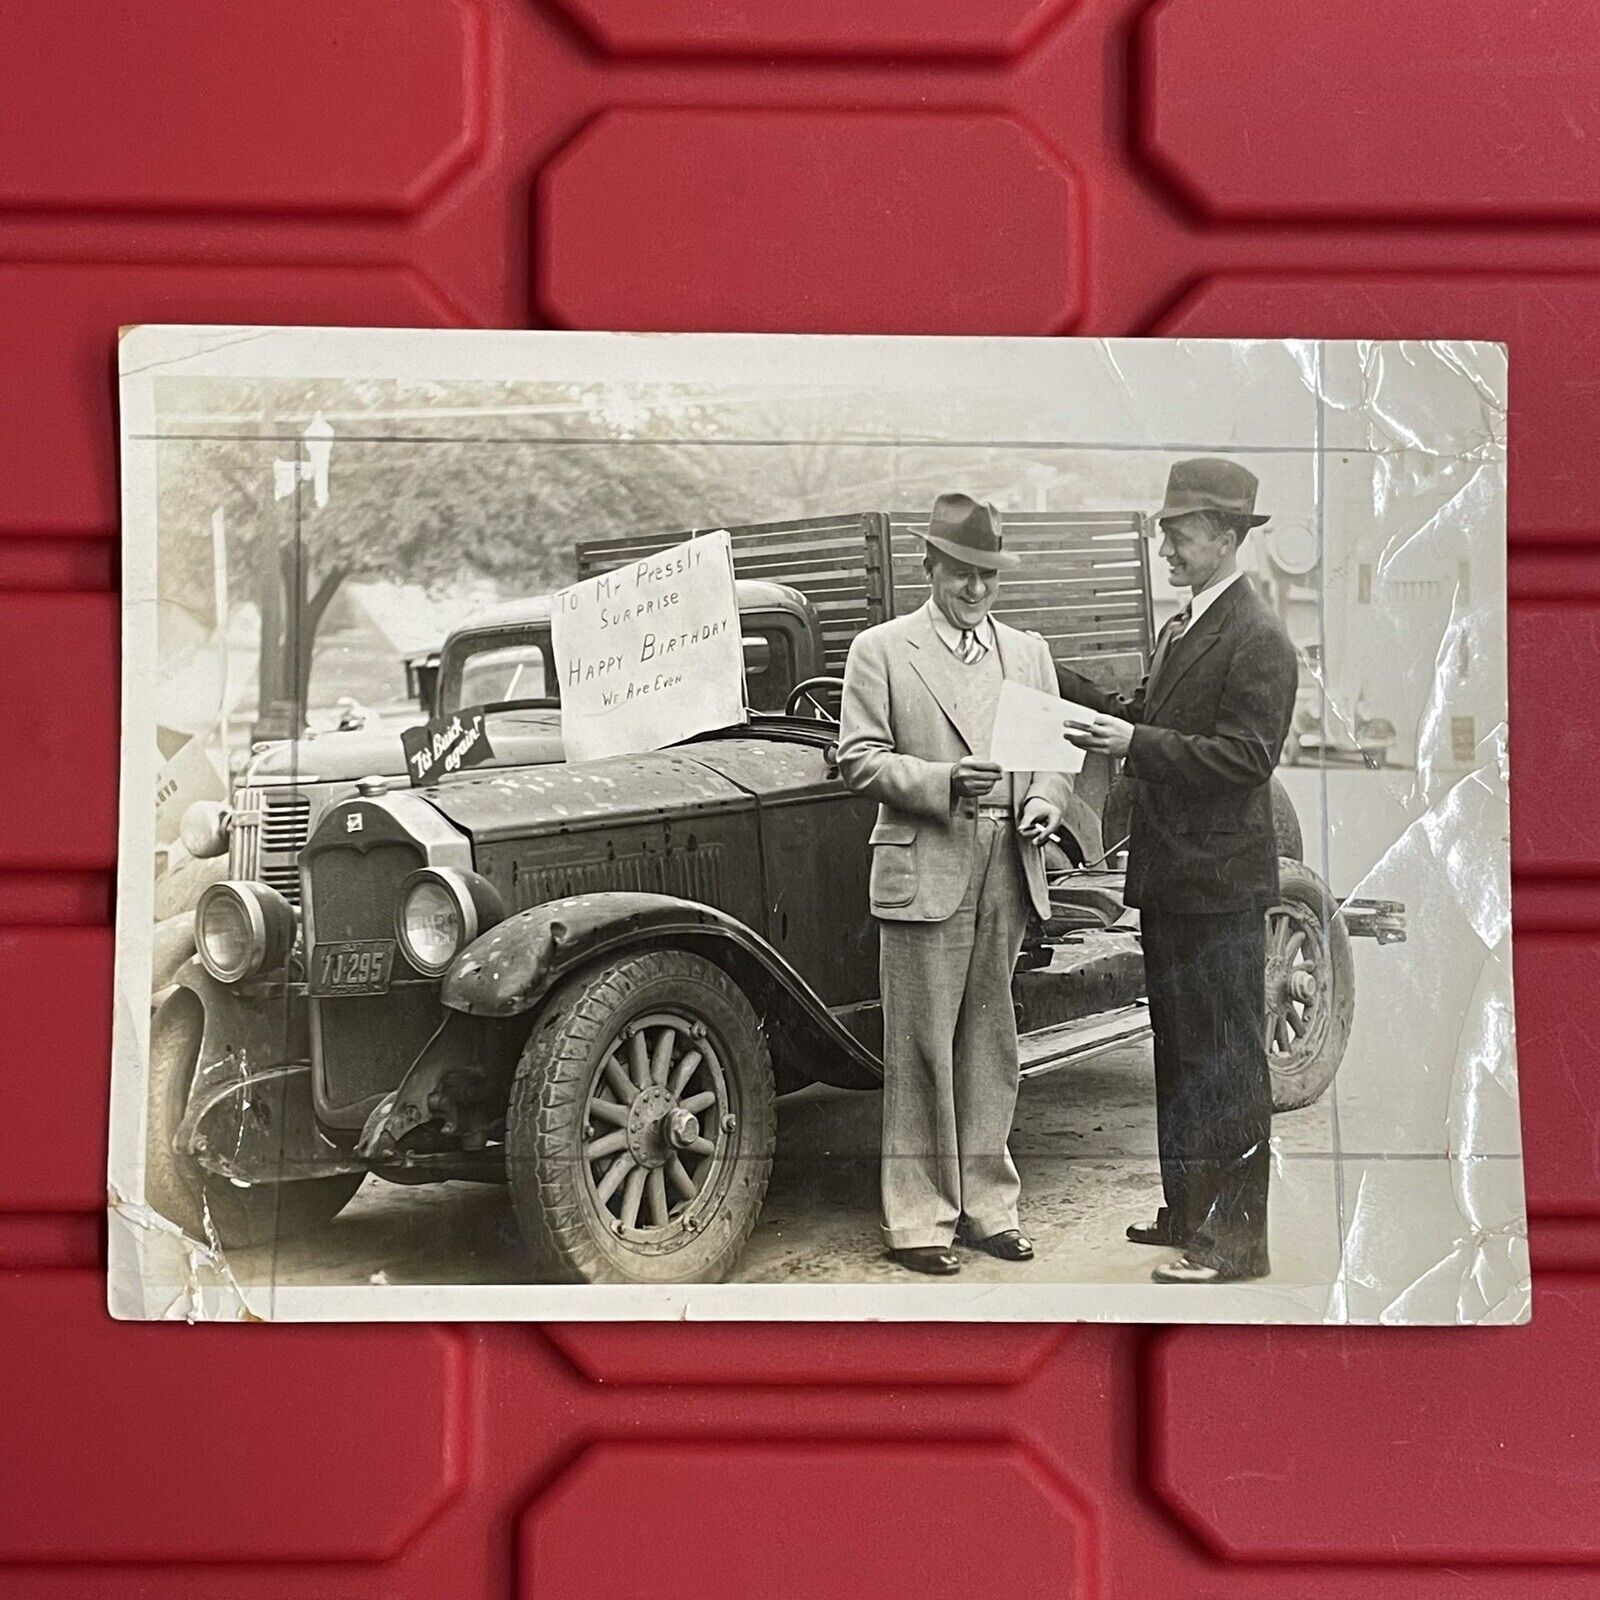 Mr Pressly We Are Even Happy Birthday Buick Car Gift 7 x 5 Photograph Vtg 1937